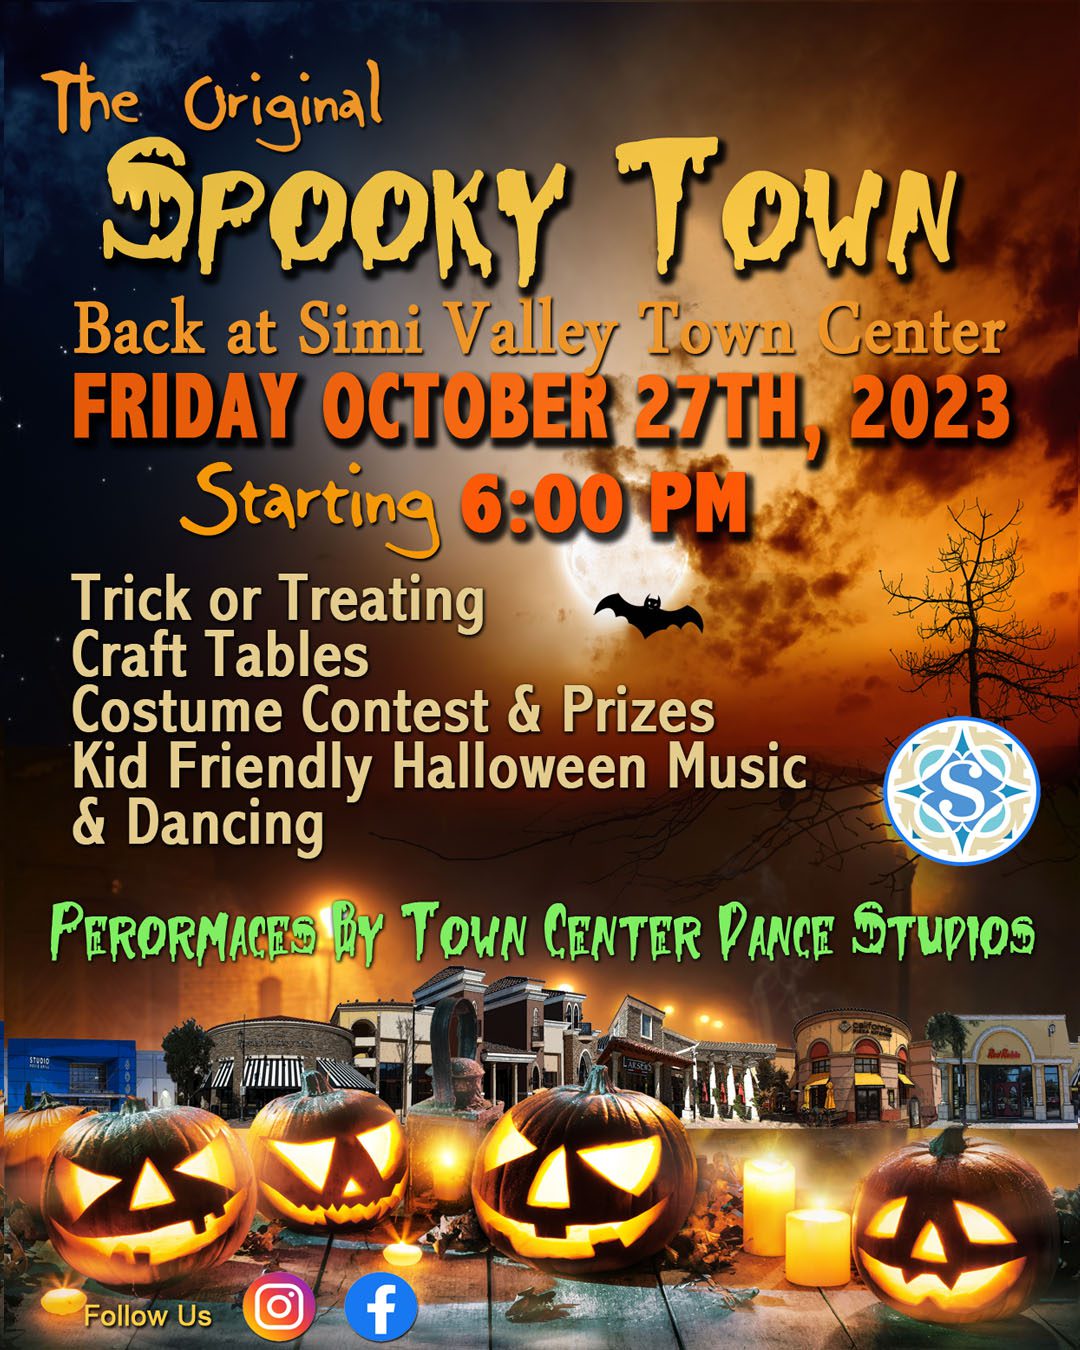 Spooky Town event flyer 2023